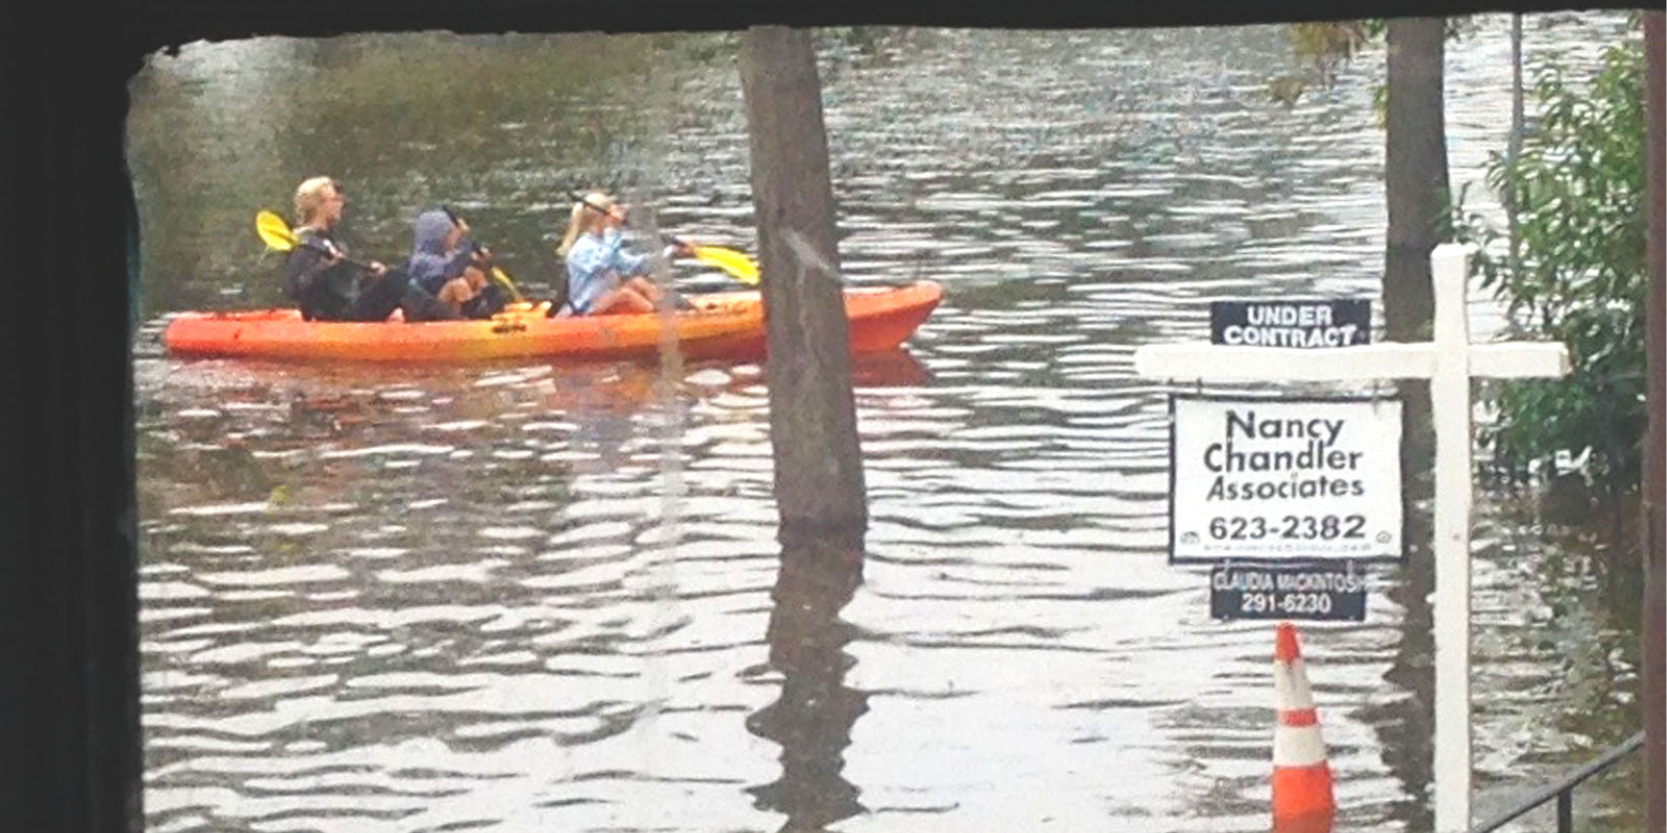 Three people on a kayak passing a for sale real estate sign in flooded area in southeastern Virginia. 